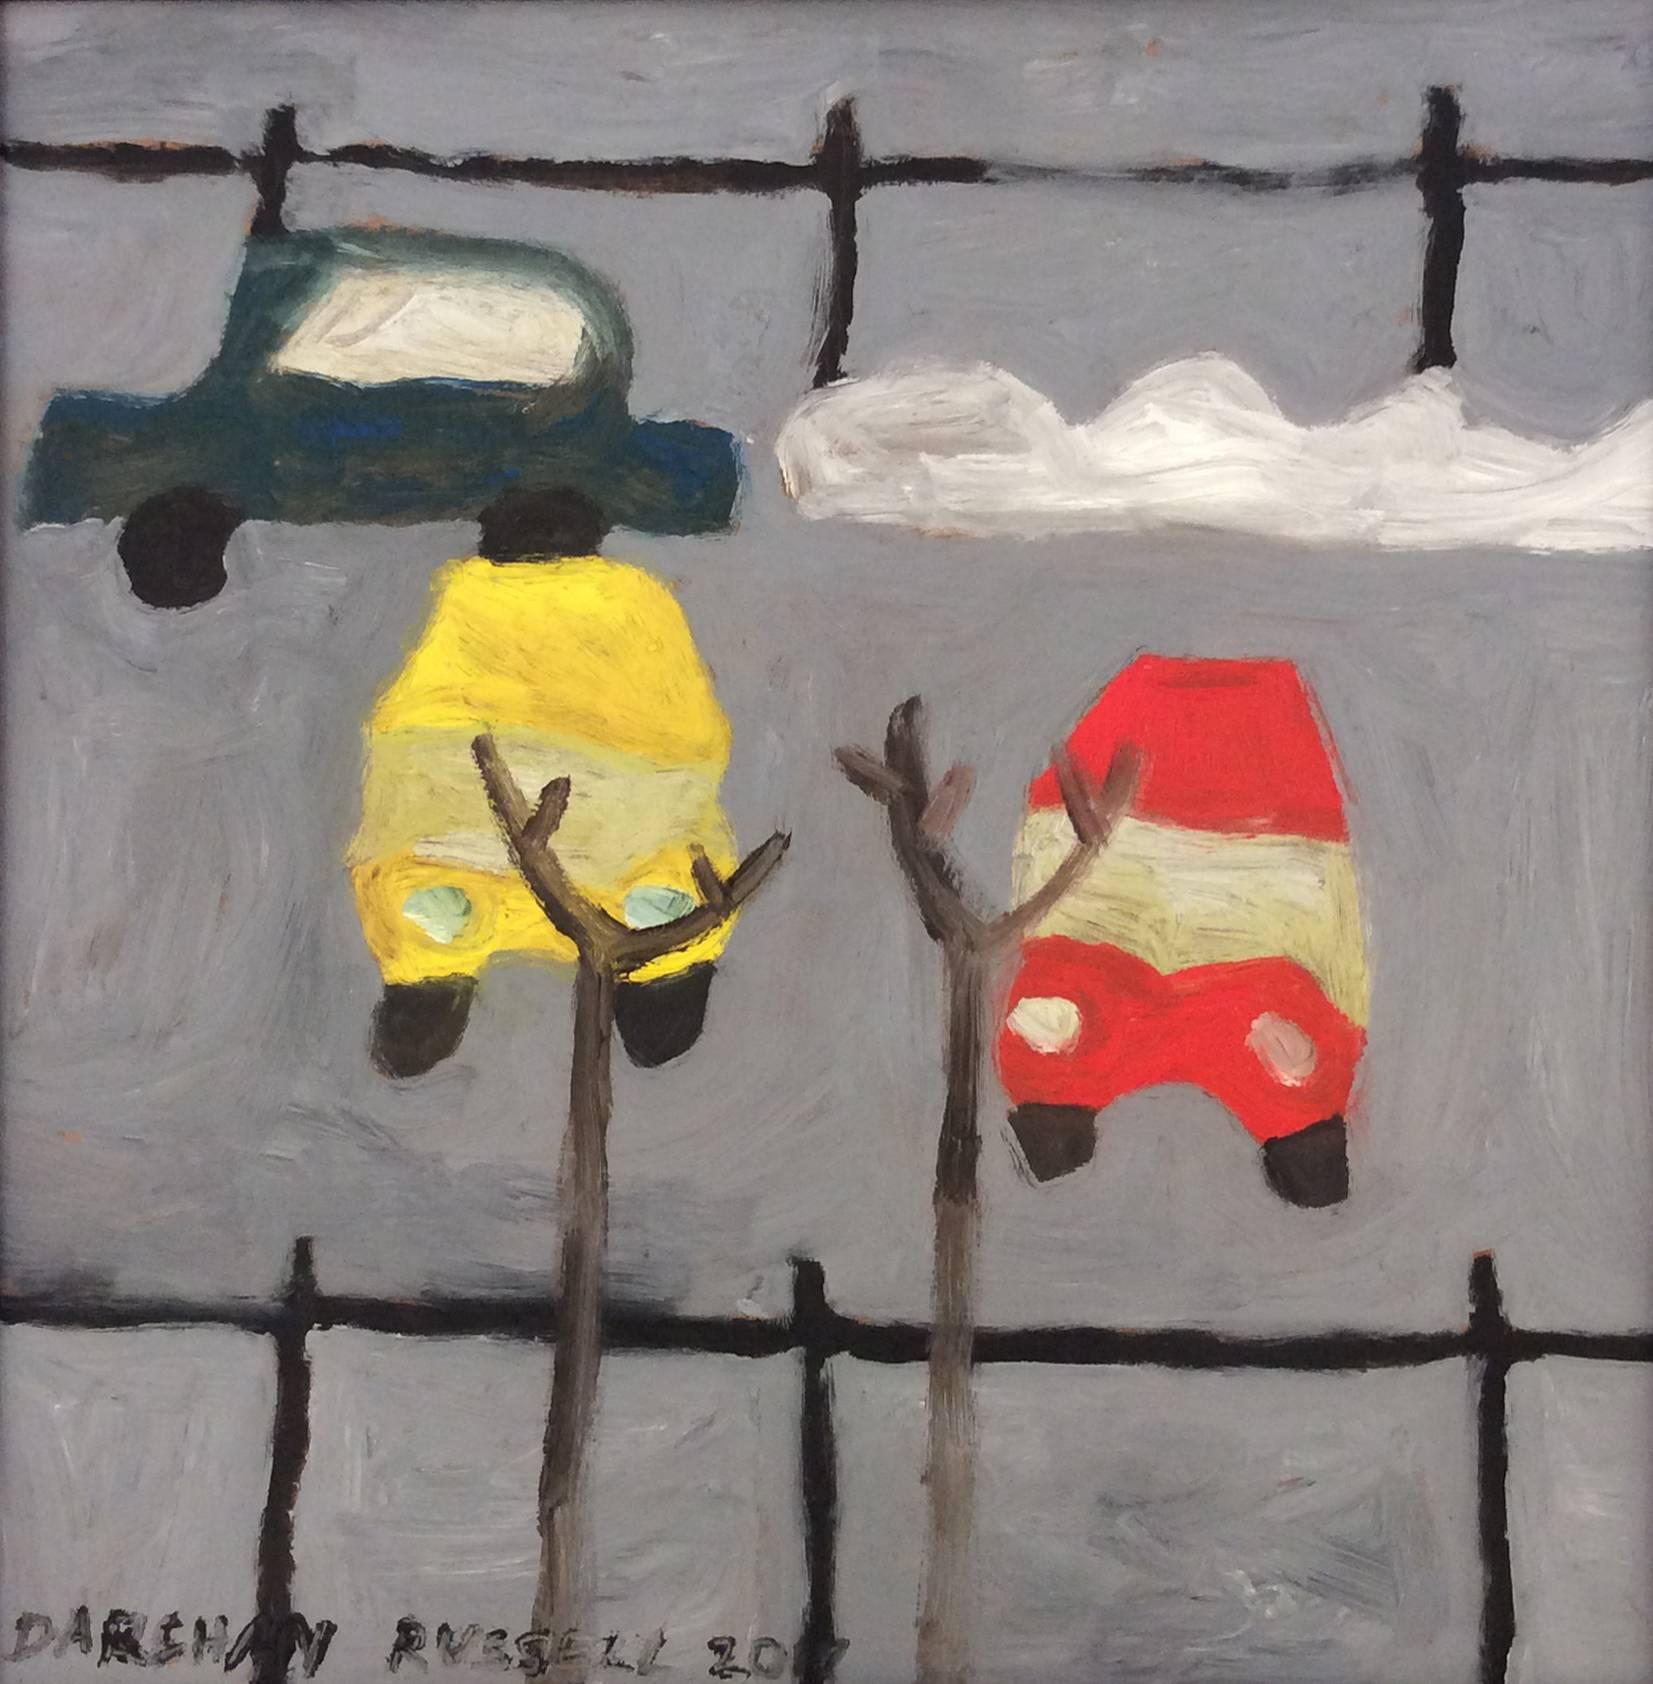 Parked Cars: Modern, Naive Style Square Oil Painting of Cars in a Gray Lot